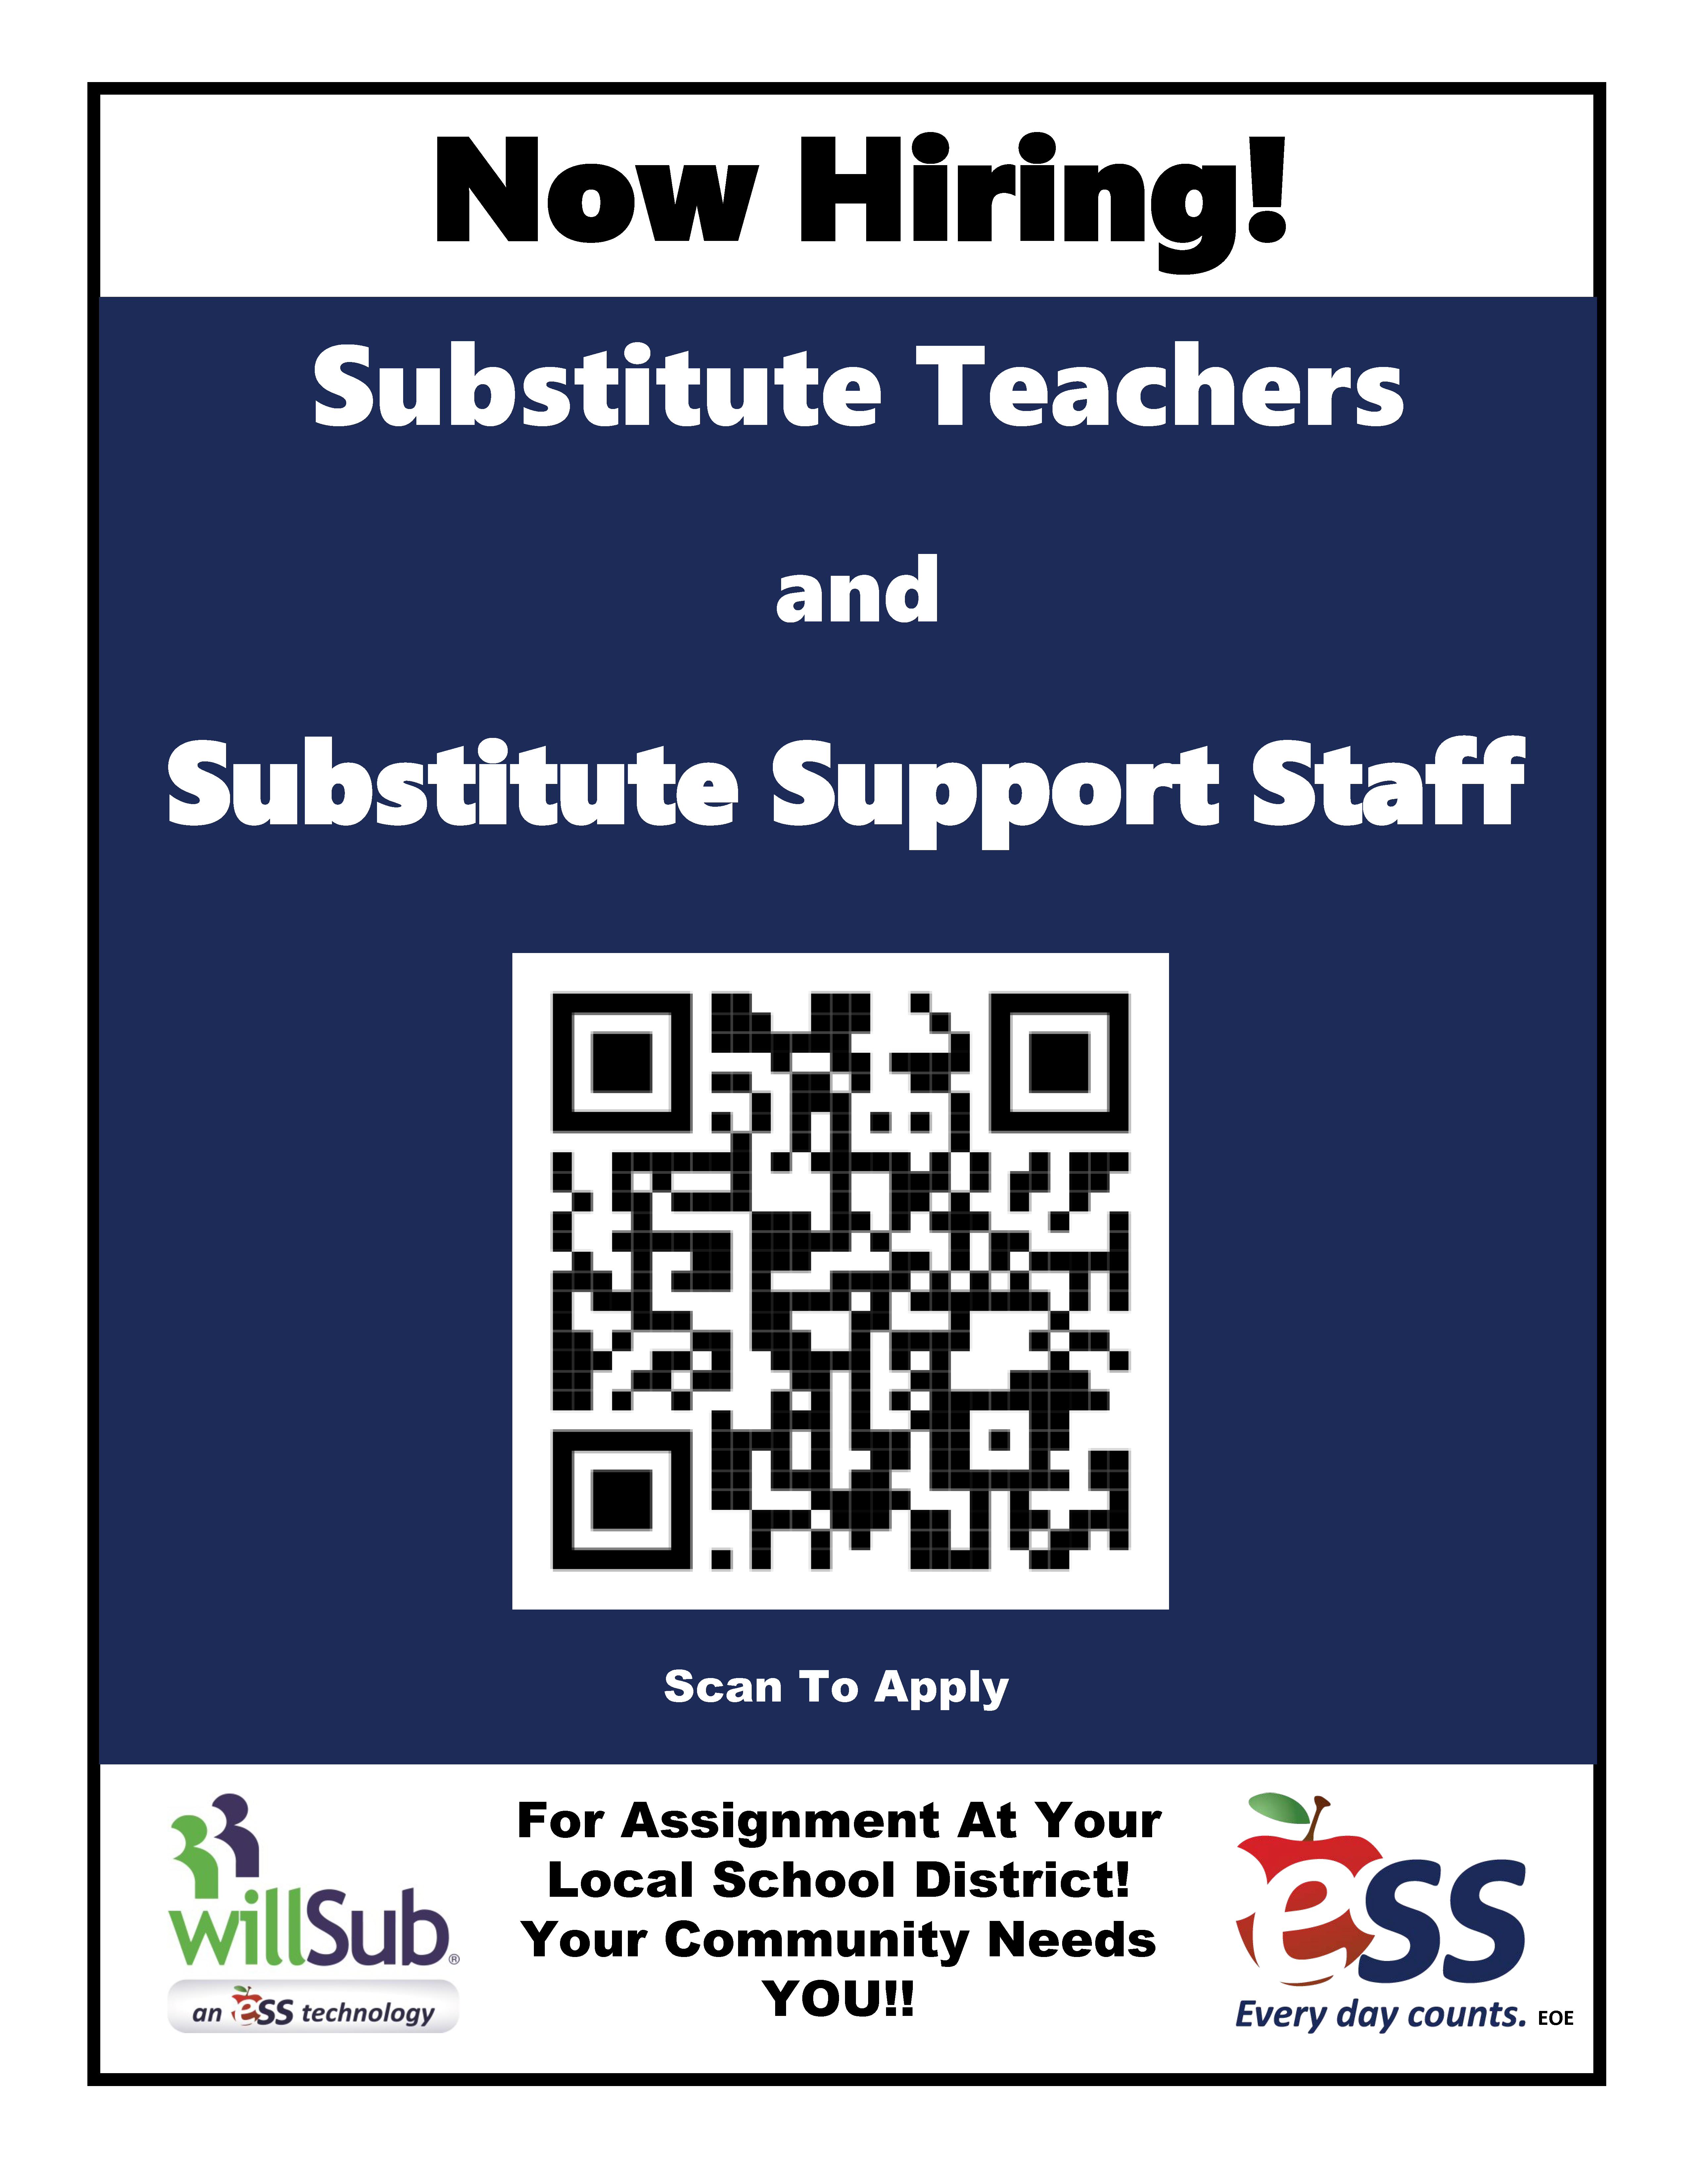 Now Hiring! Substitute Teachers and Support Staff.